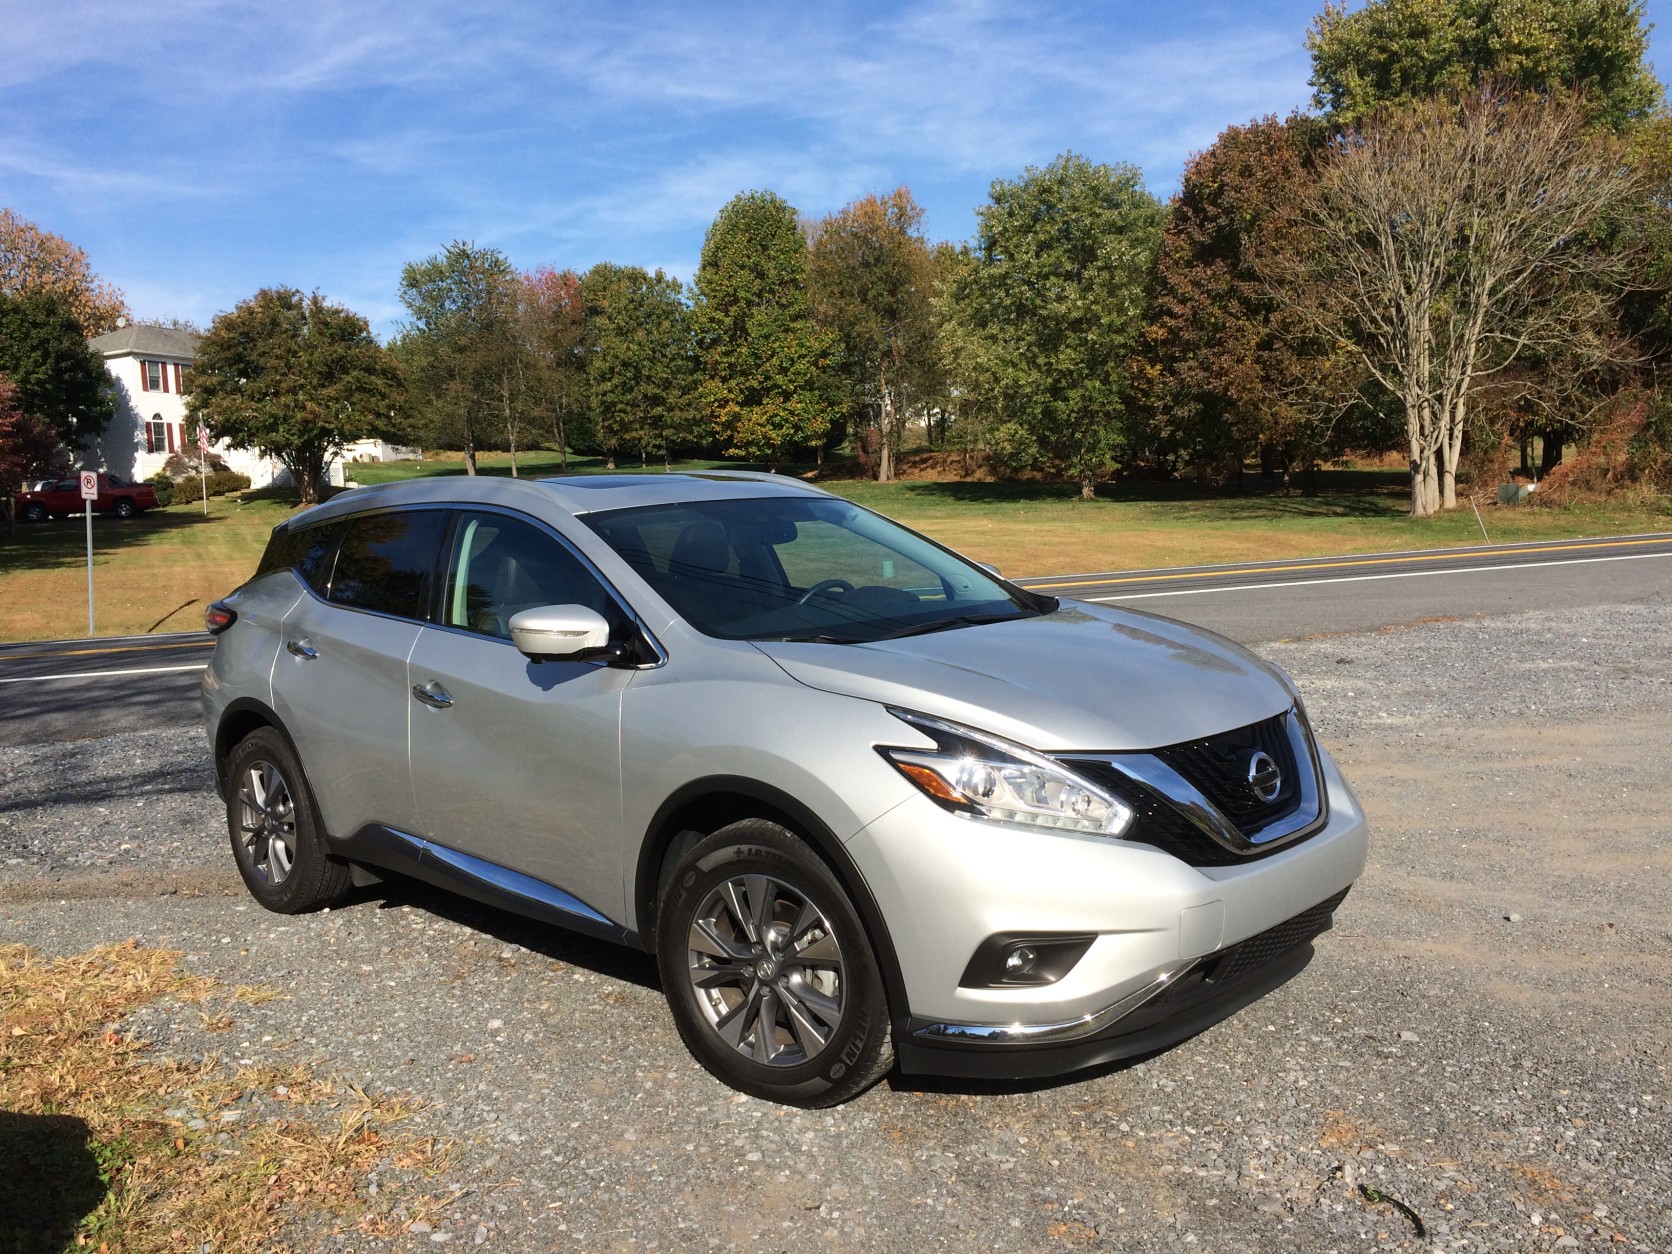 The redesigned Murano SL has gone from an odd-looking crossover to a high-style machine on the outside with interesting shapes and angles up front. (WTOP/Mike Parris)